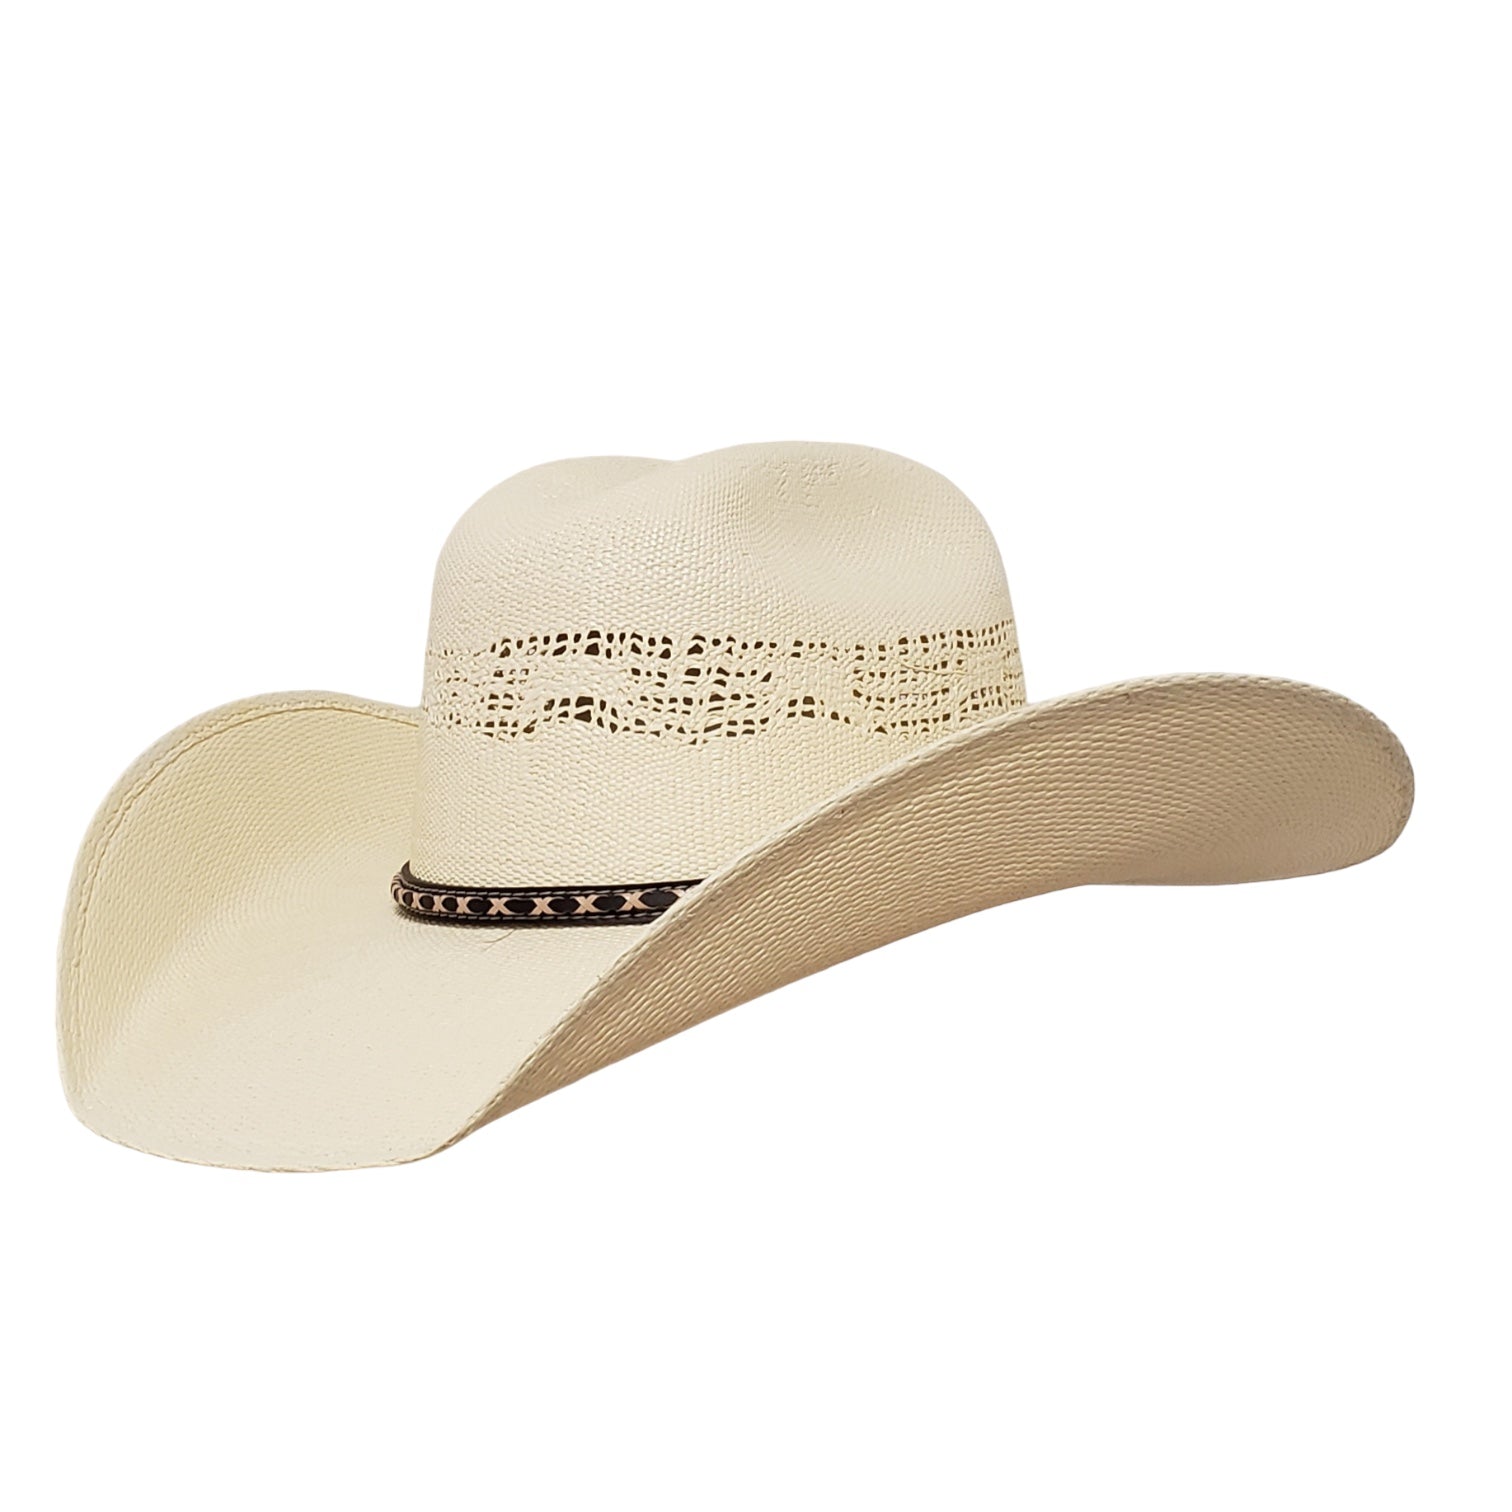 Justin Vented Ivory Straw Cowboy Hat 2XL Fits 7-7/8 to 8